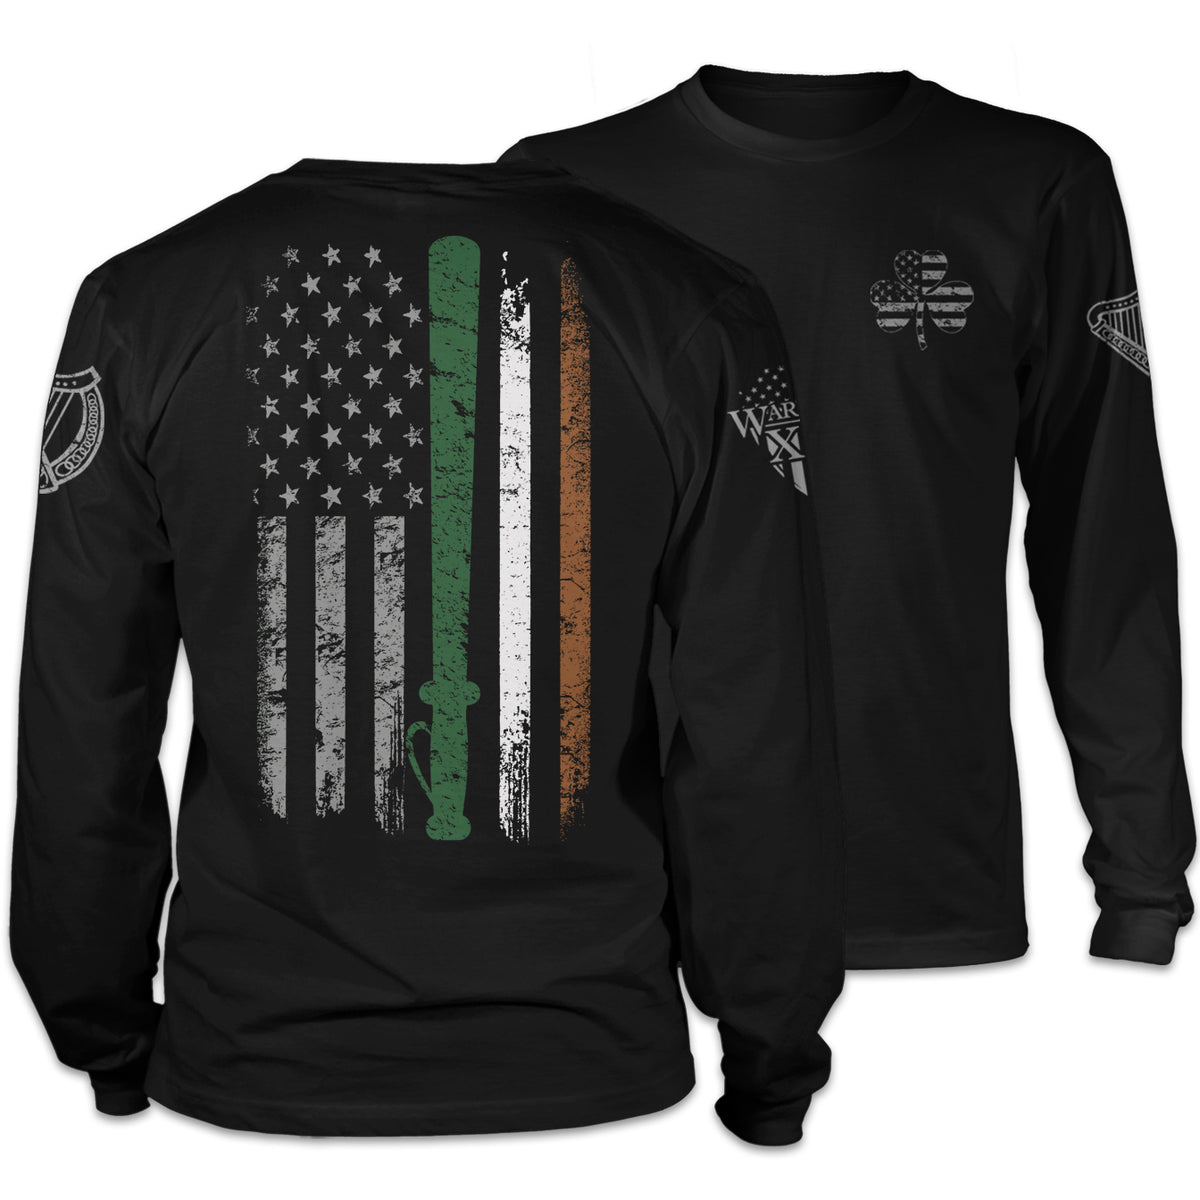 Front and back black long sleeve shirt which features St. Patrick's Irish Police Flag printed on the shirt.